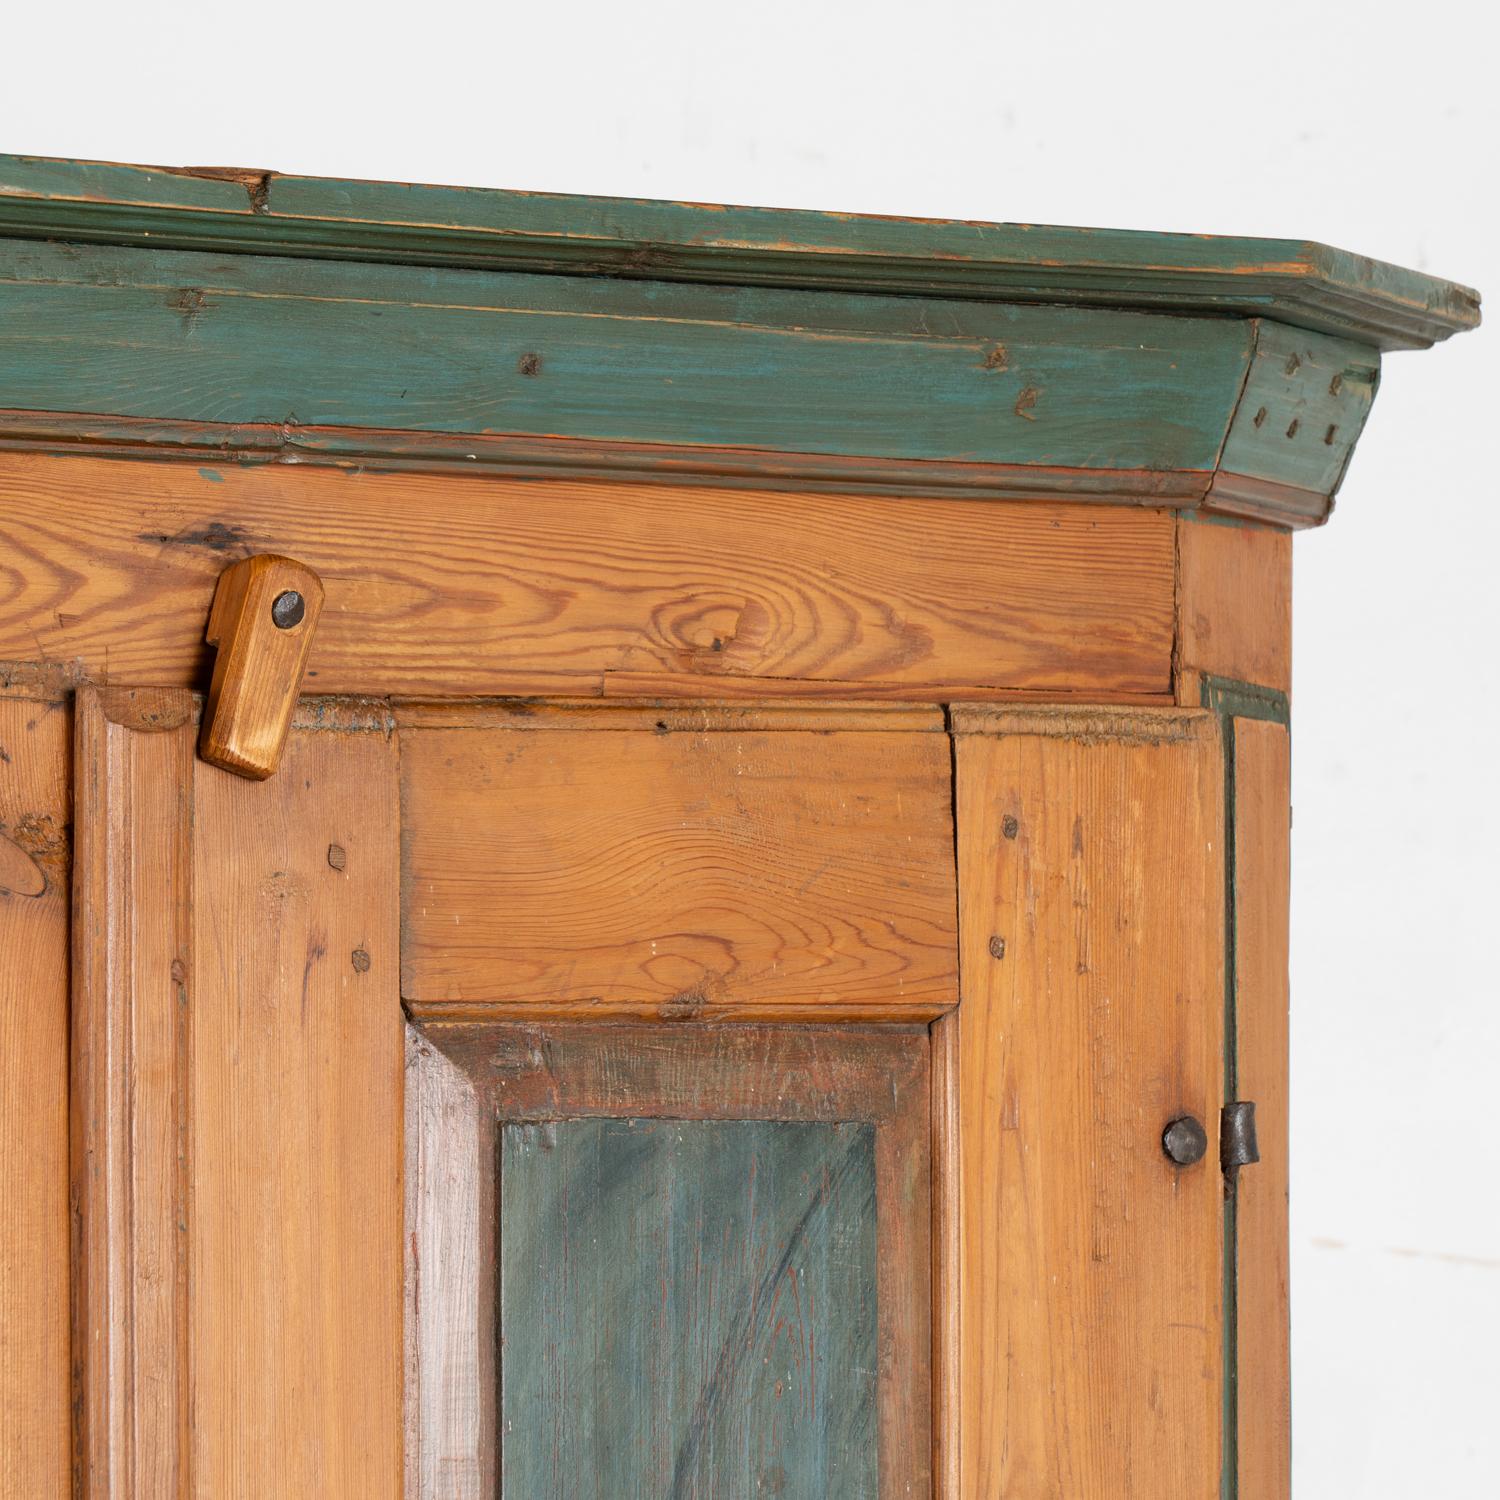 Original Painted Narrow Pine Armoire, Sweden circa 1820-40 In Good Condition For Sale In Round Top, TX